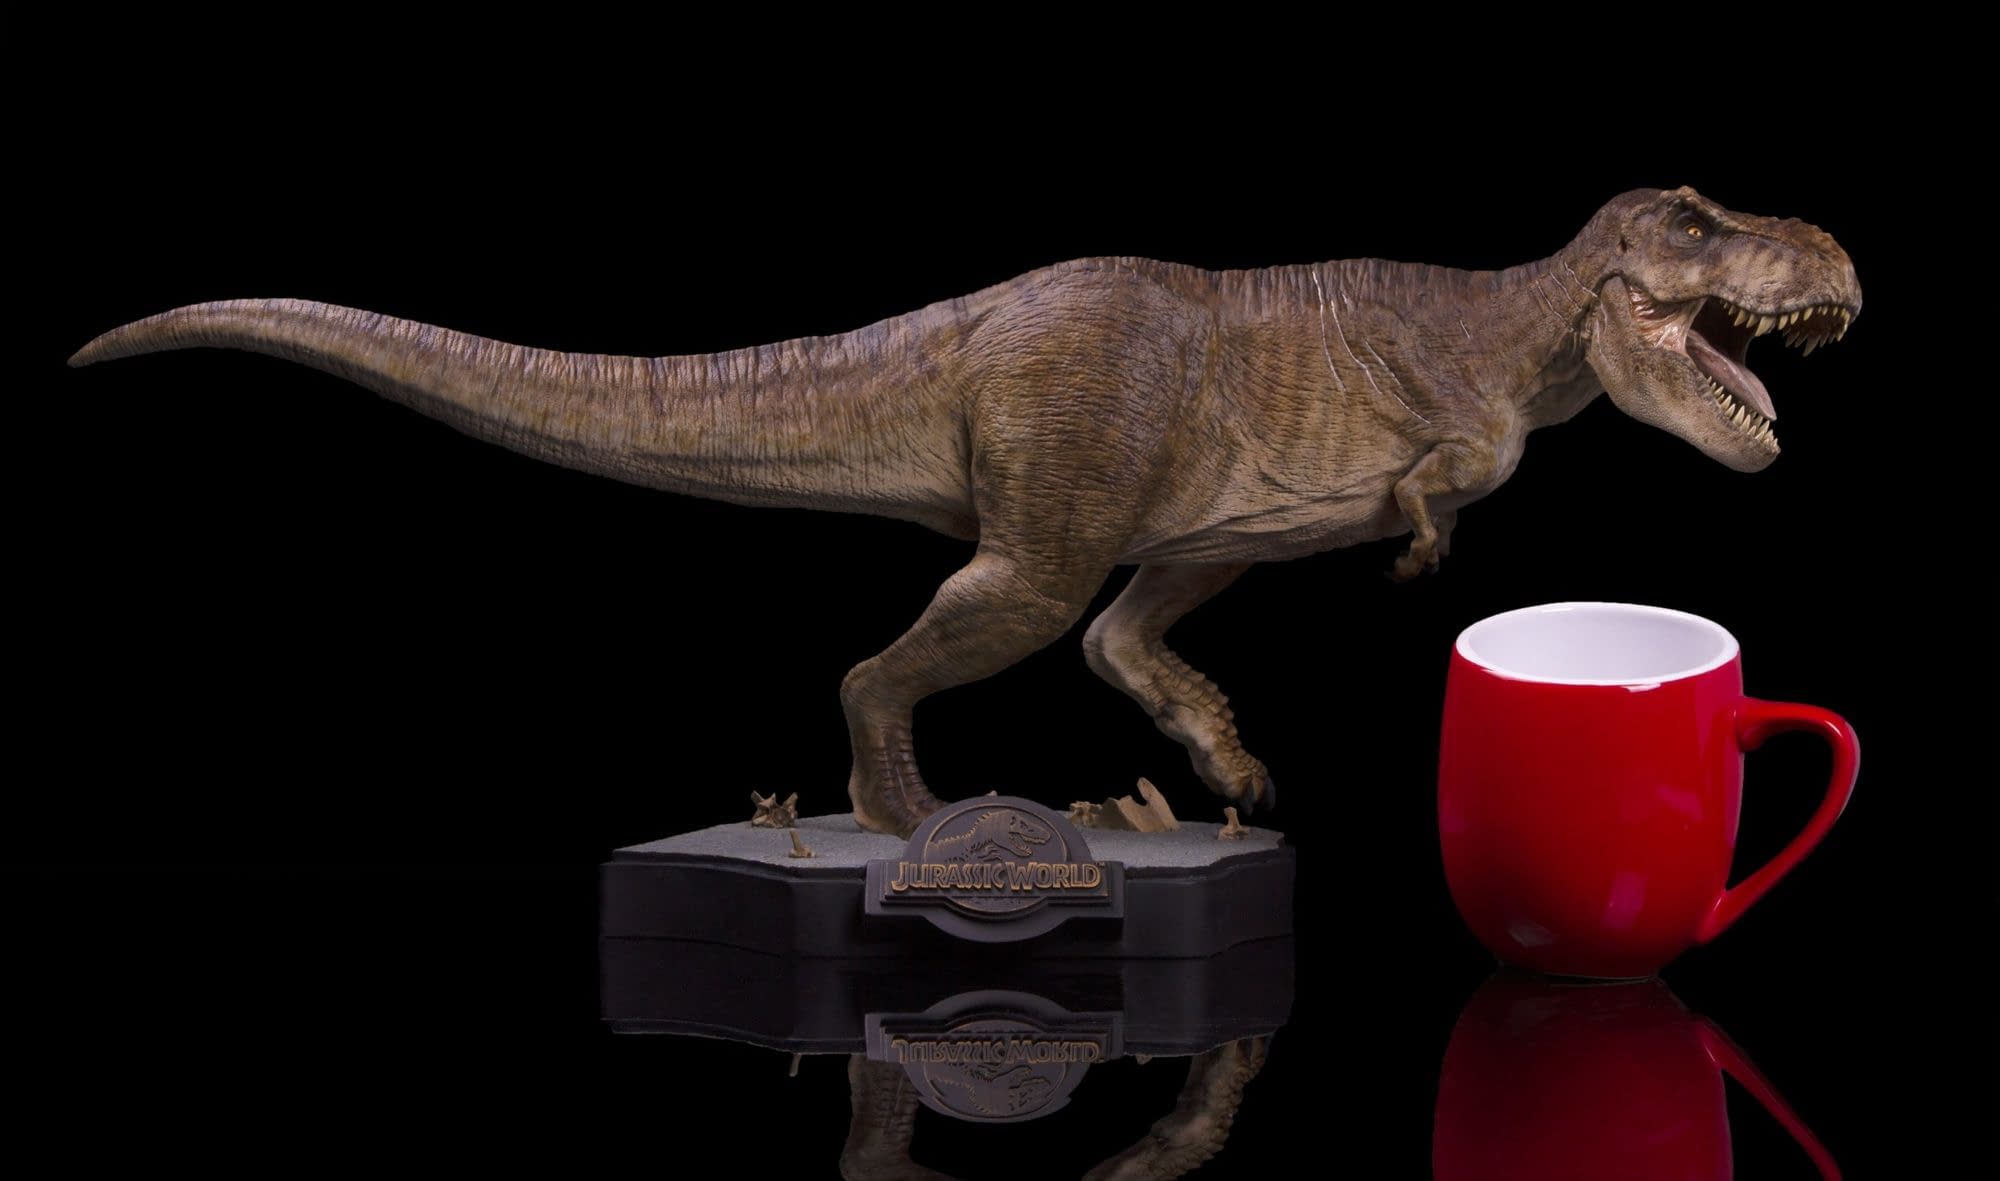 Jurassic World T Rex Is On The Loose With New Chronicle Statue